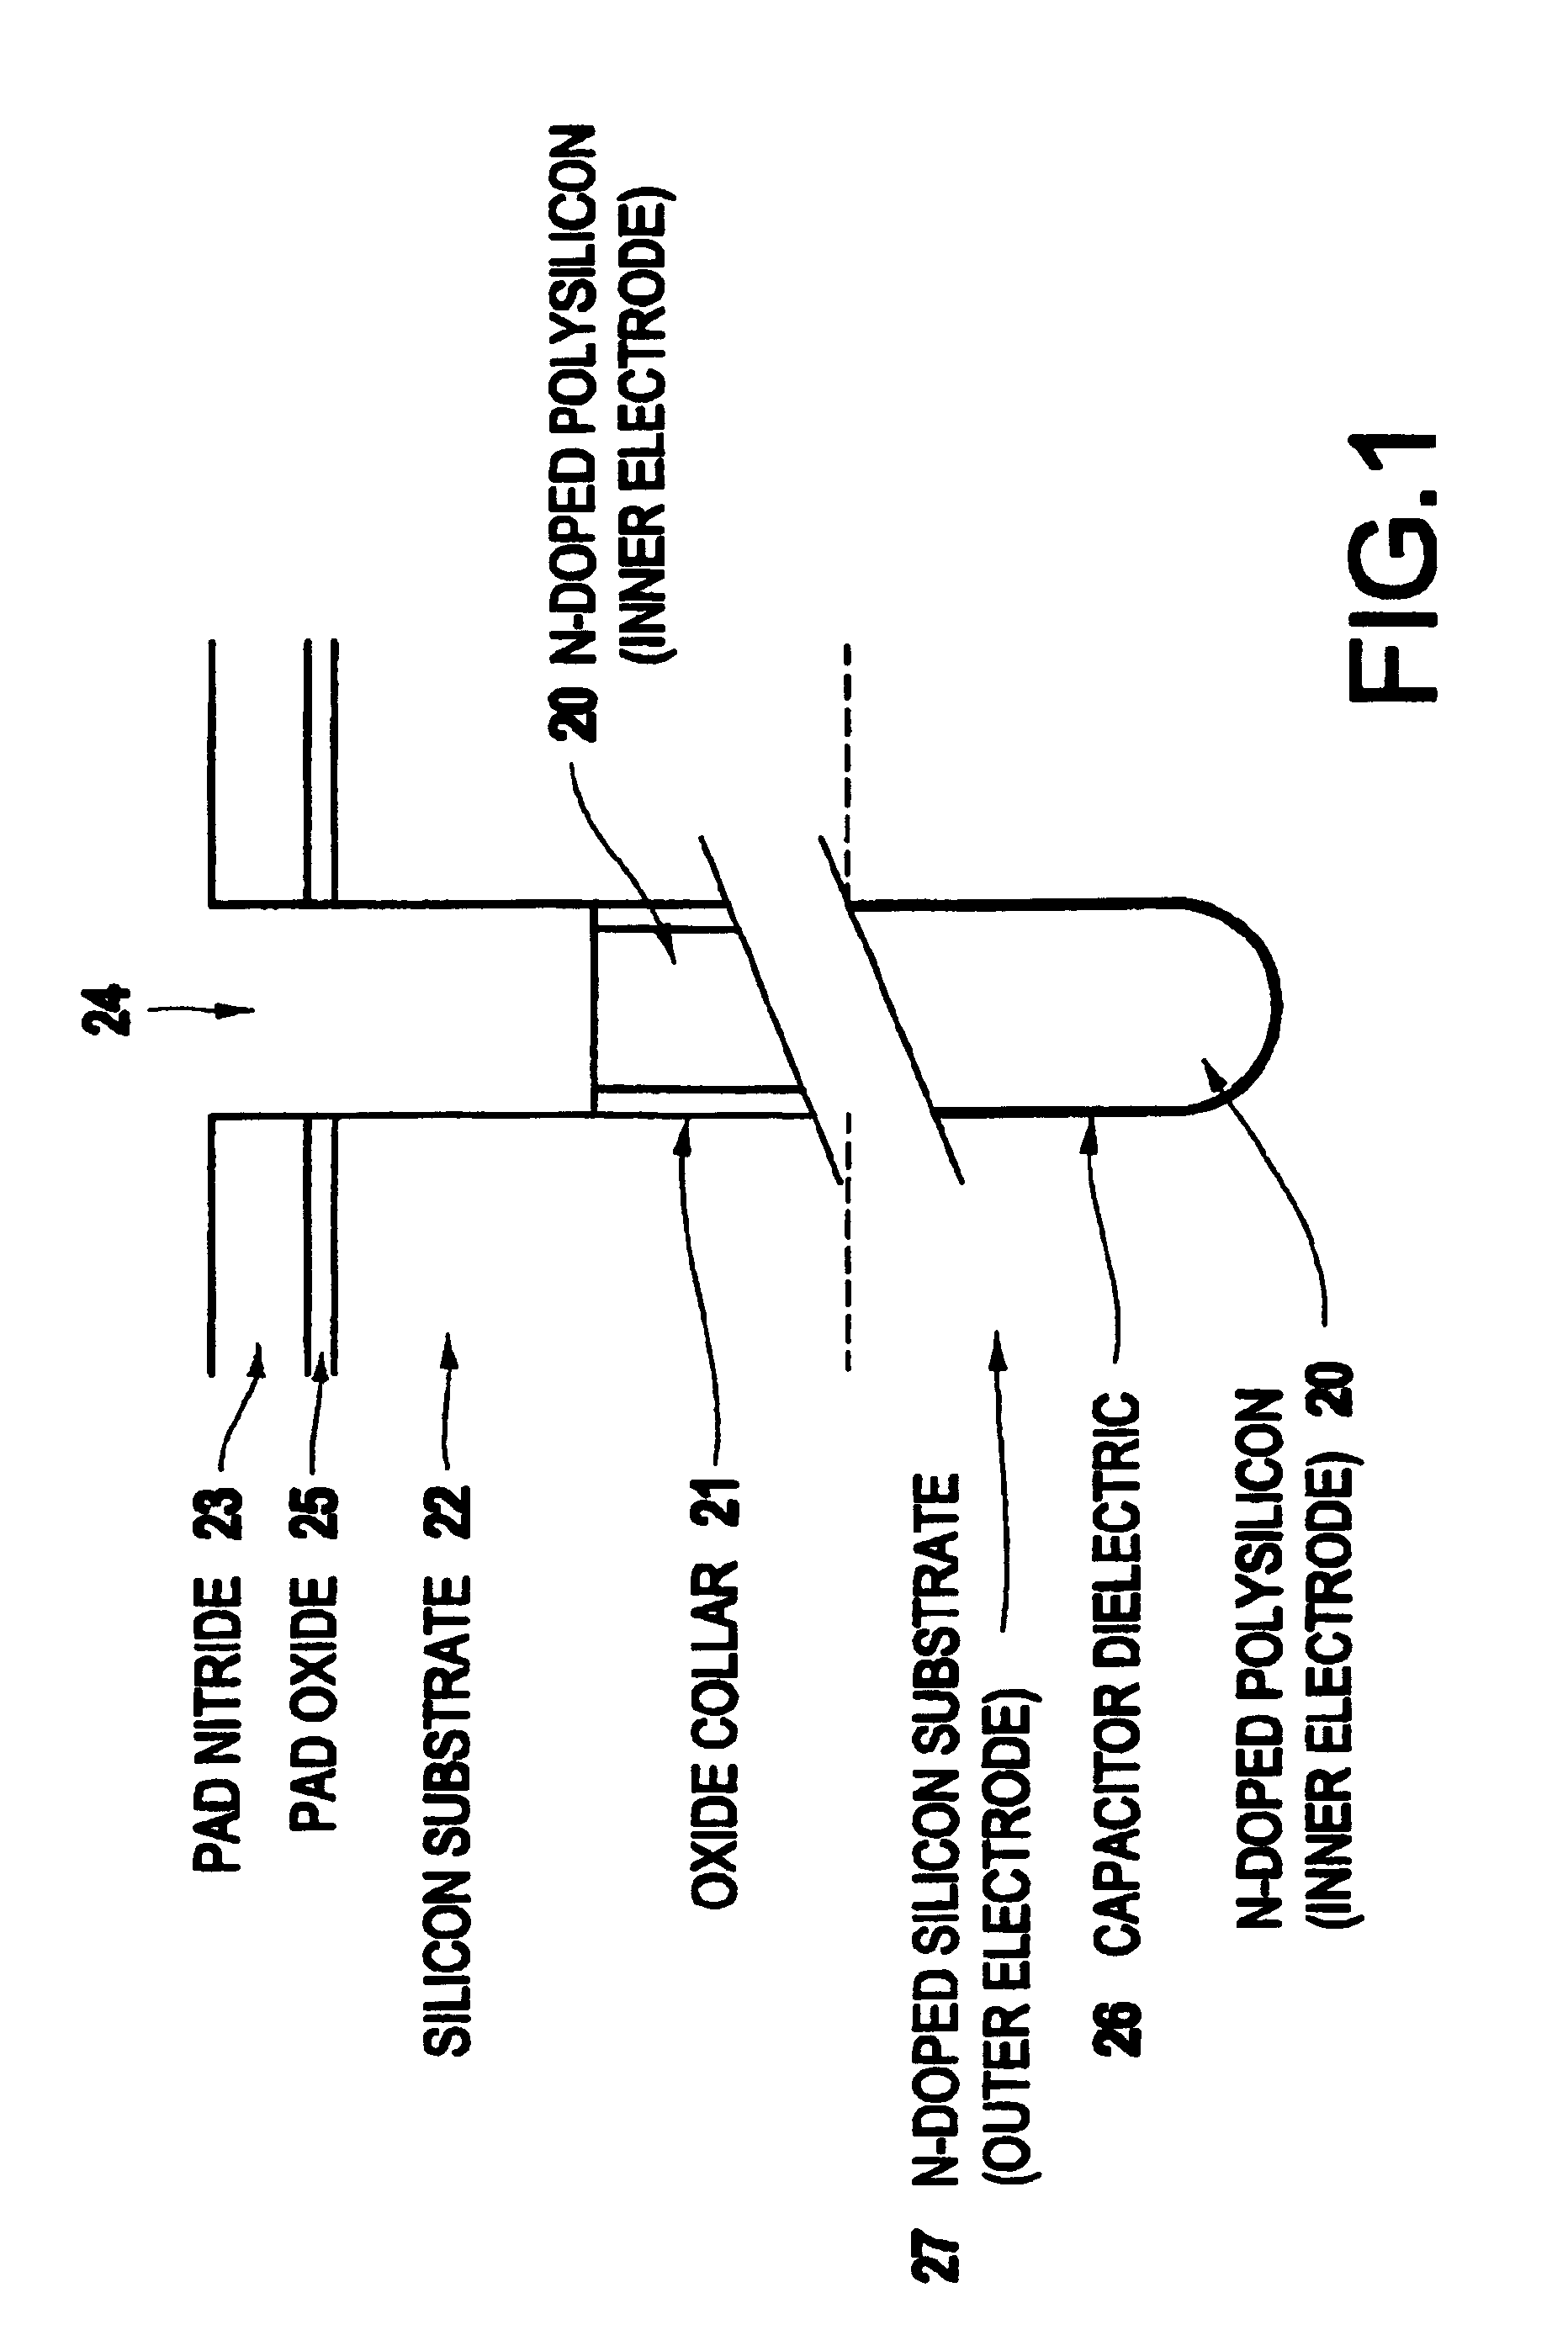 Self-aligned buried strap process using doped HDP oxide